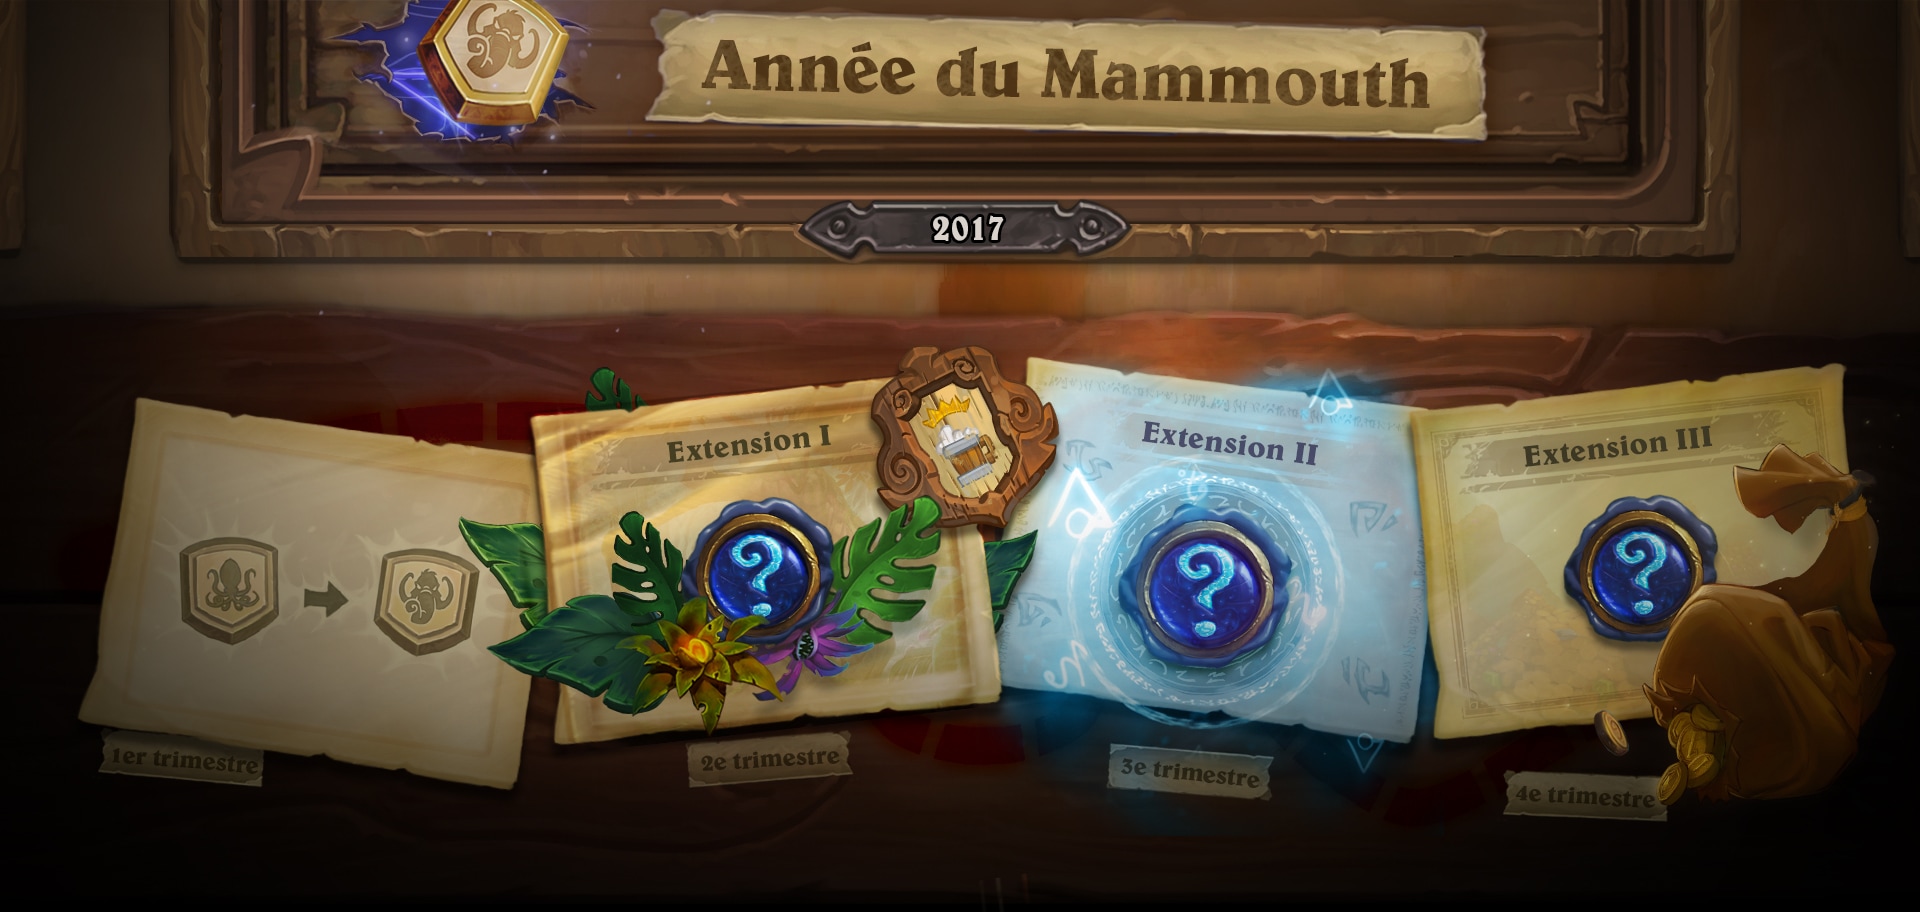 2017 "Year of the Mammoth" Release Timeline